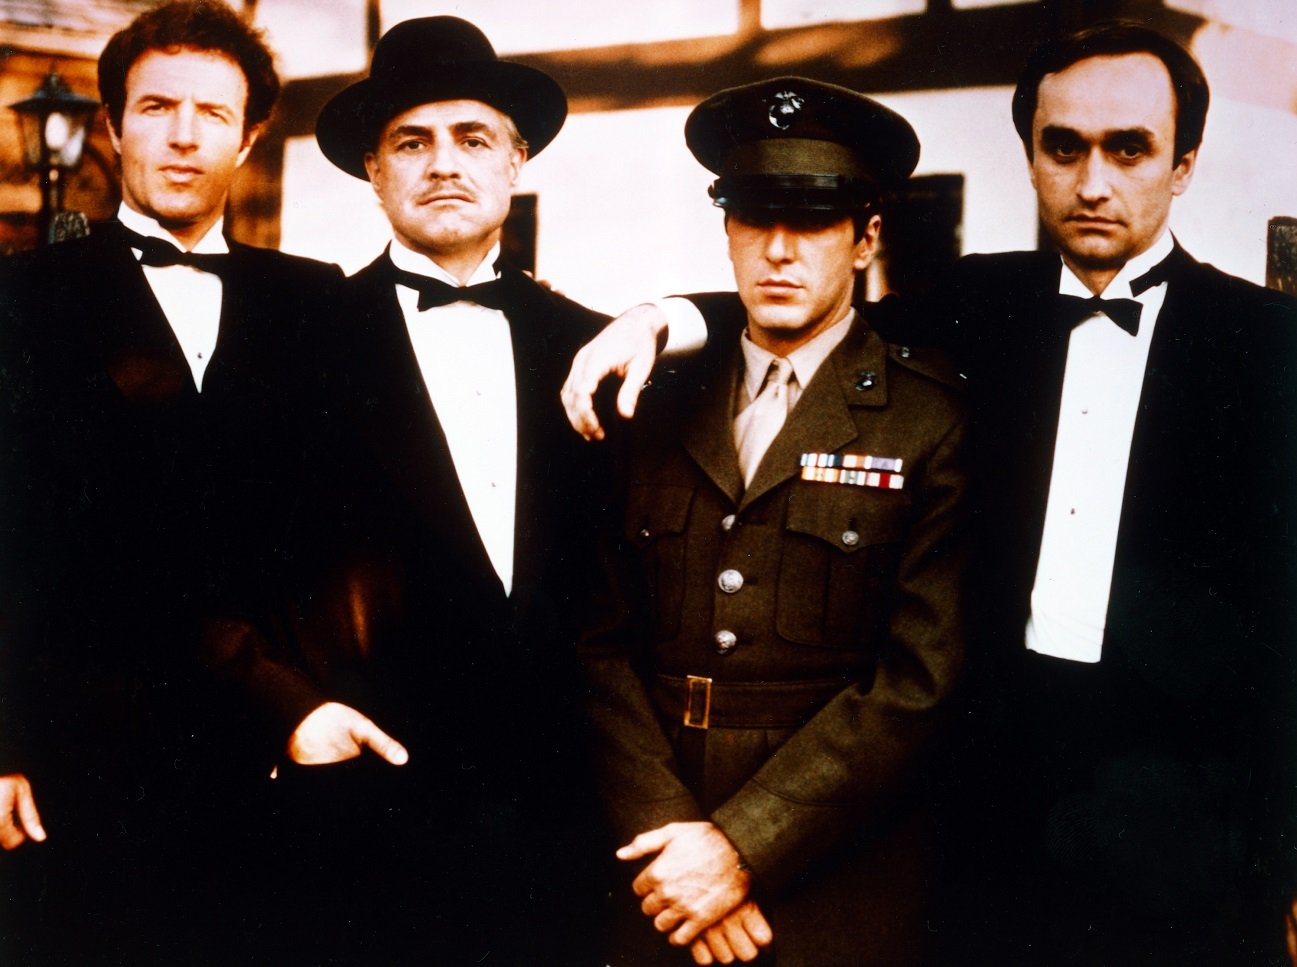 Publicity photo featuring the male leads of 'The Godfather'